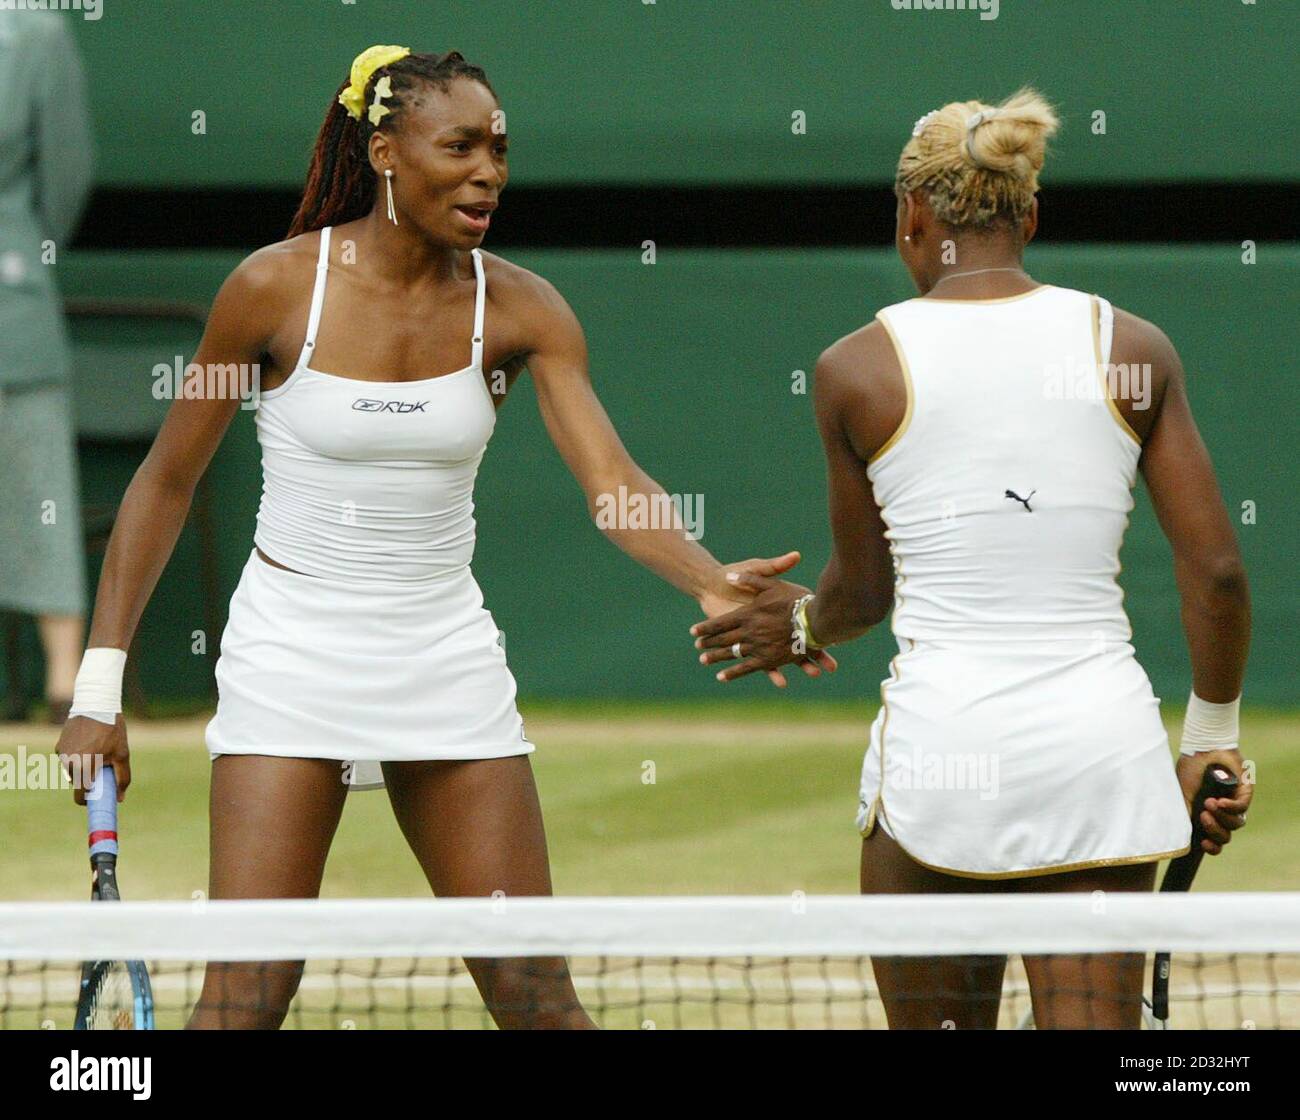 EDITORIAL USE ONLY, NO COMMERCIAL USE. Serena and Venus Williams from the USA in action in the Ladies' Doubles Final at Wimbledon which they won in straight sets 6:2/7:5 against Virgina Ruano Pascual from Spain and Paola Suarez of Argentina. * The Williams sisters competed against each other in the Ladies' Singles Final yesterday, with Serena beating her older sister in straight sets. Stock Photo